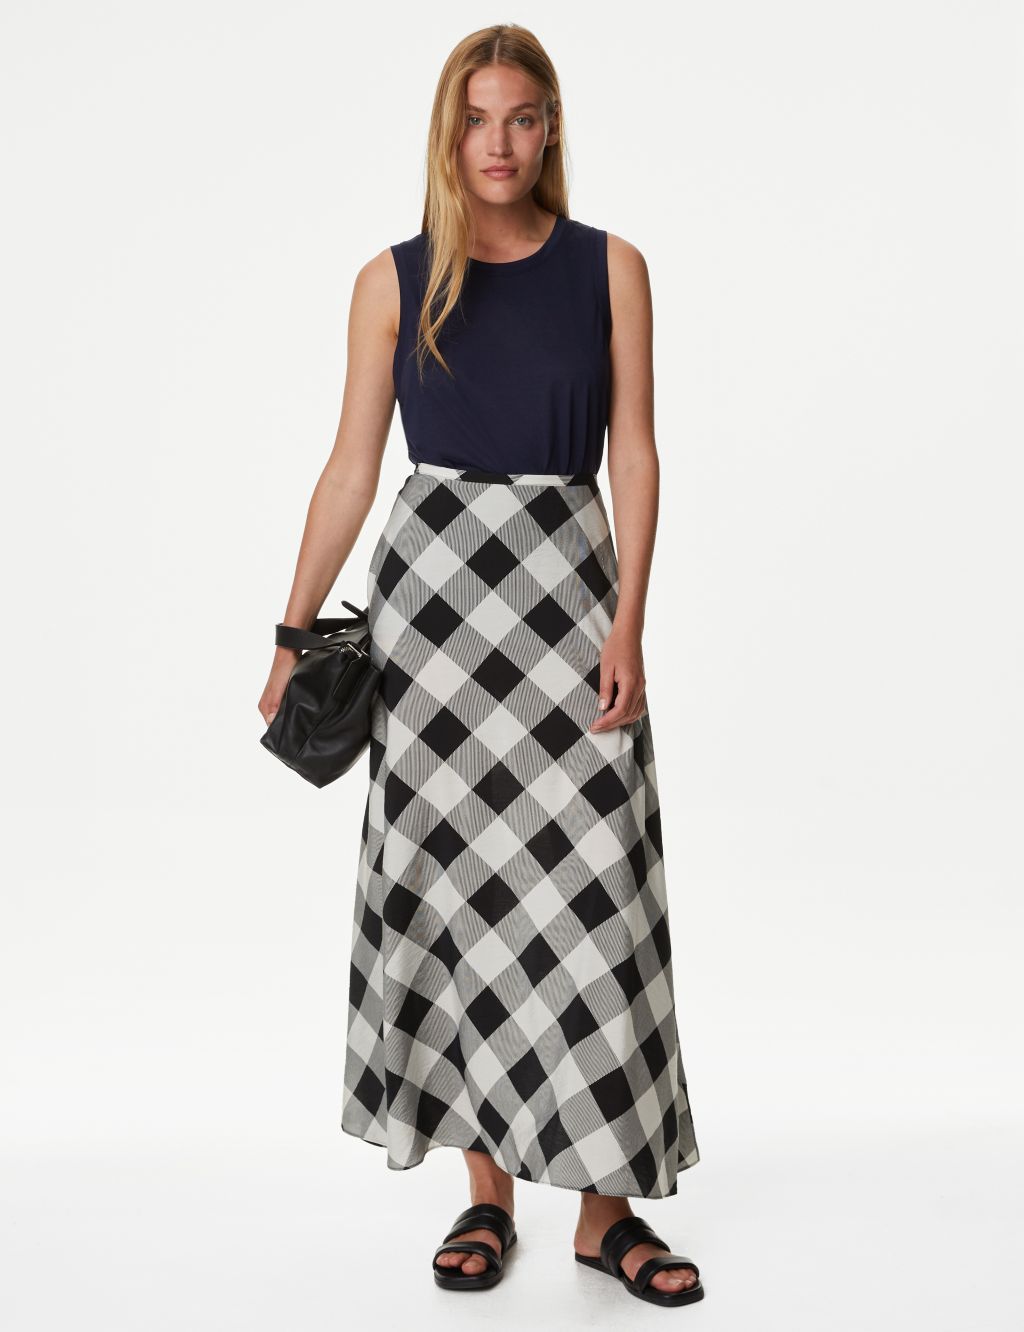 Checked Maxi A-Line Skirt image 5